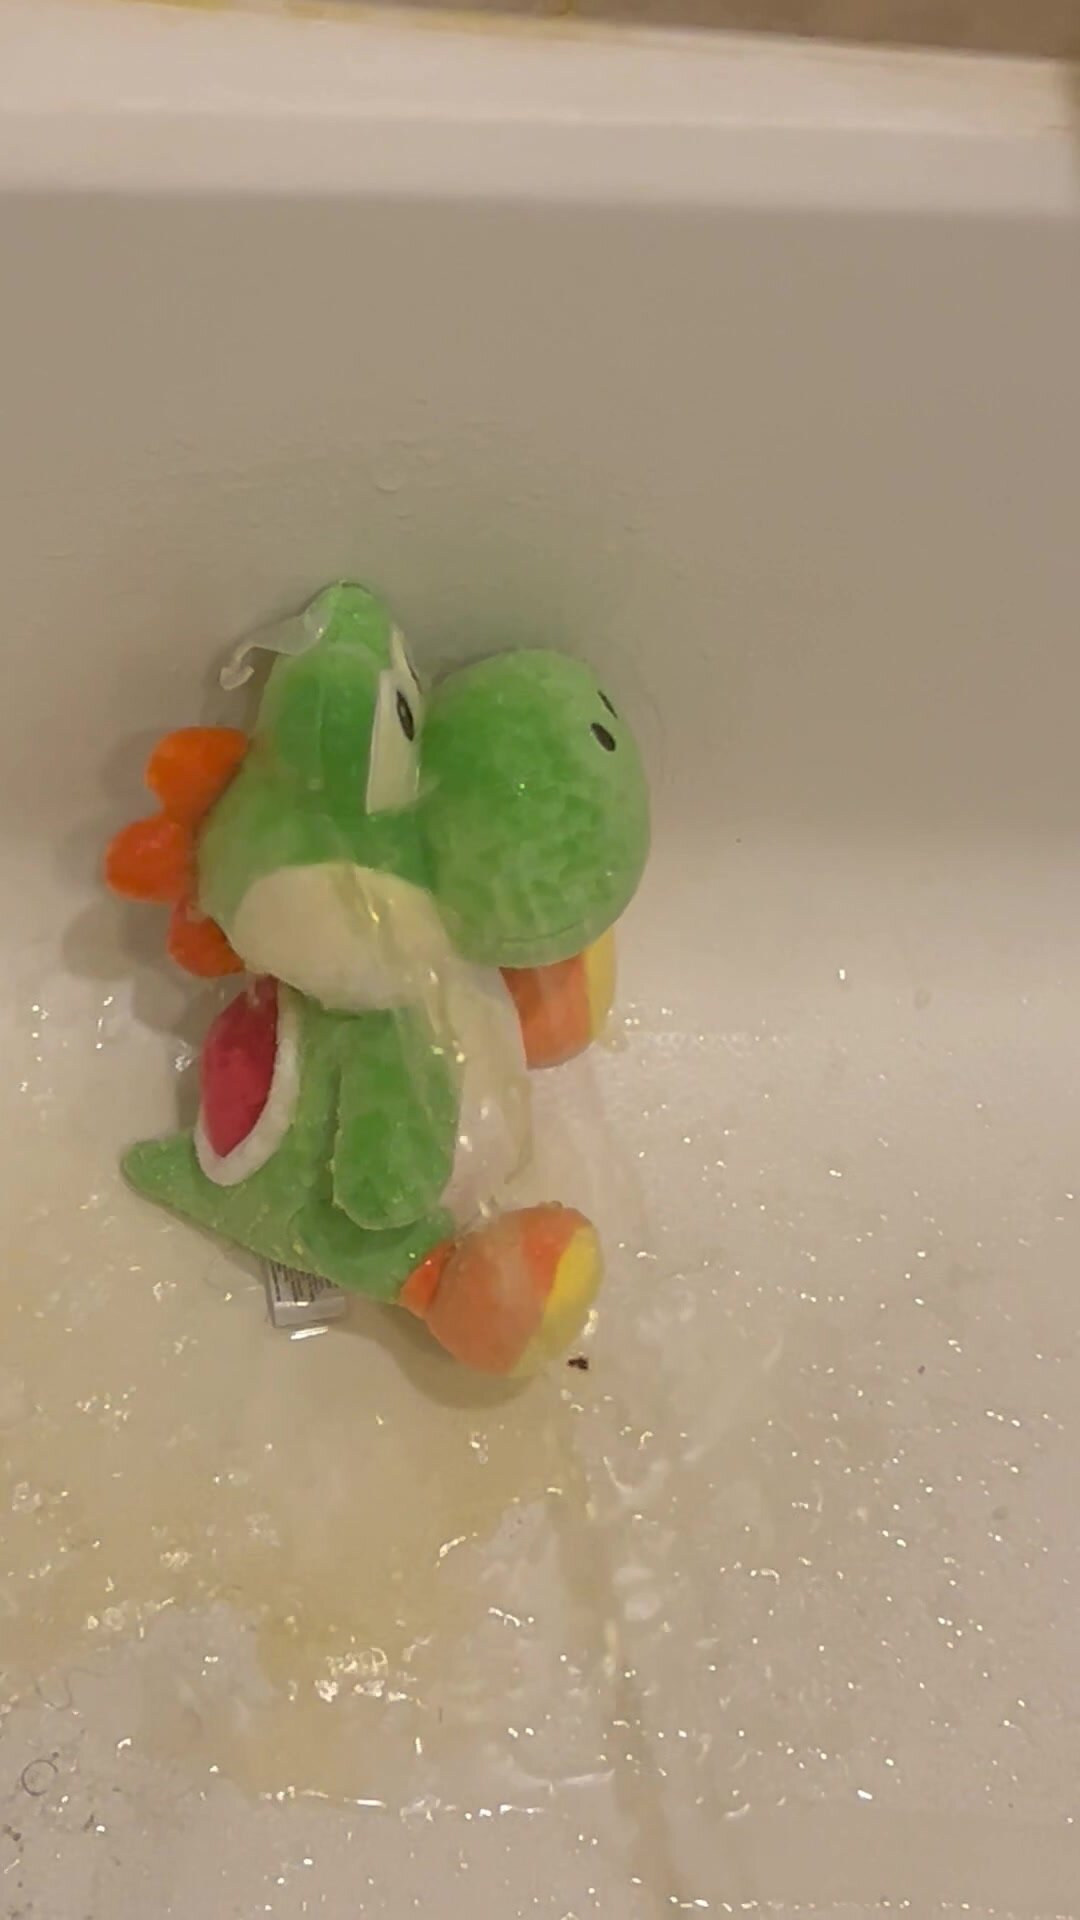 One Of My Last YOSHIS Gets There Golden Shower